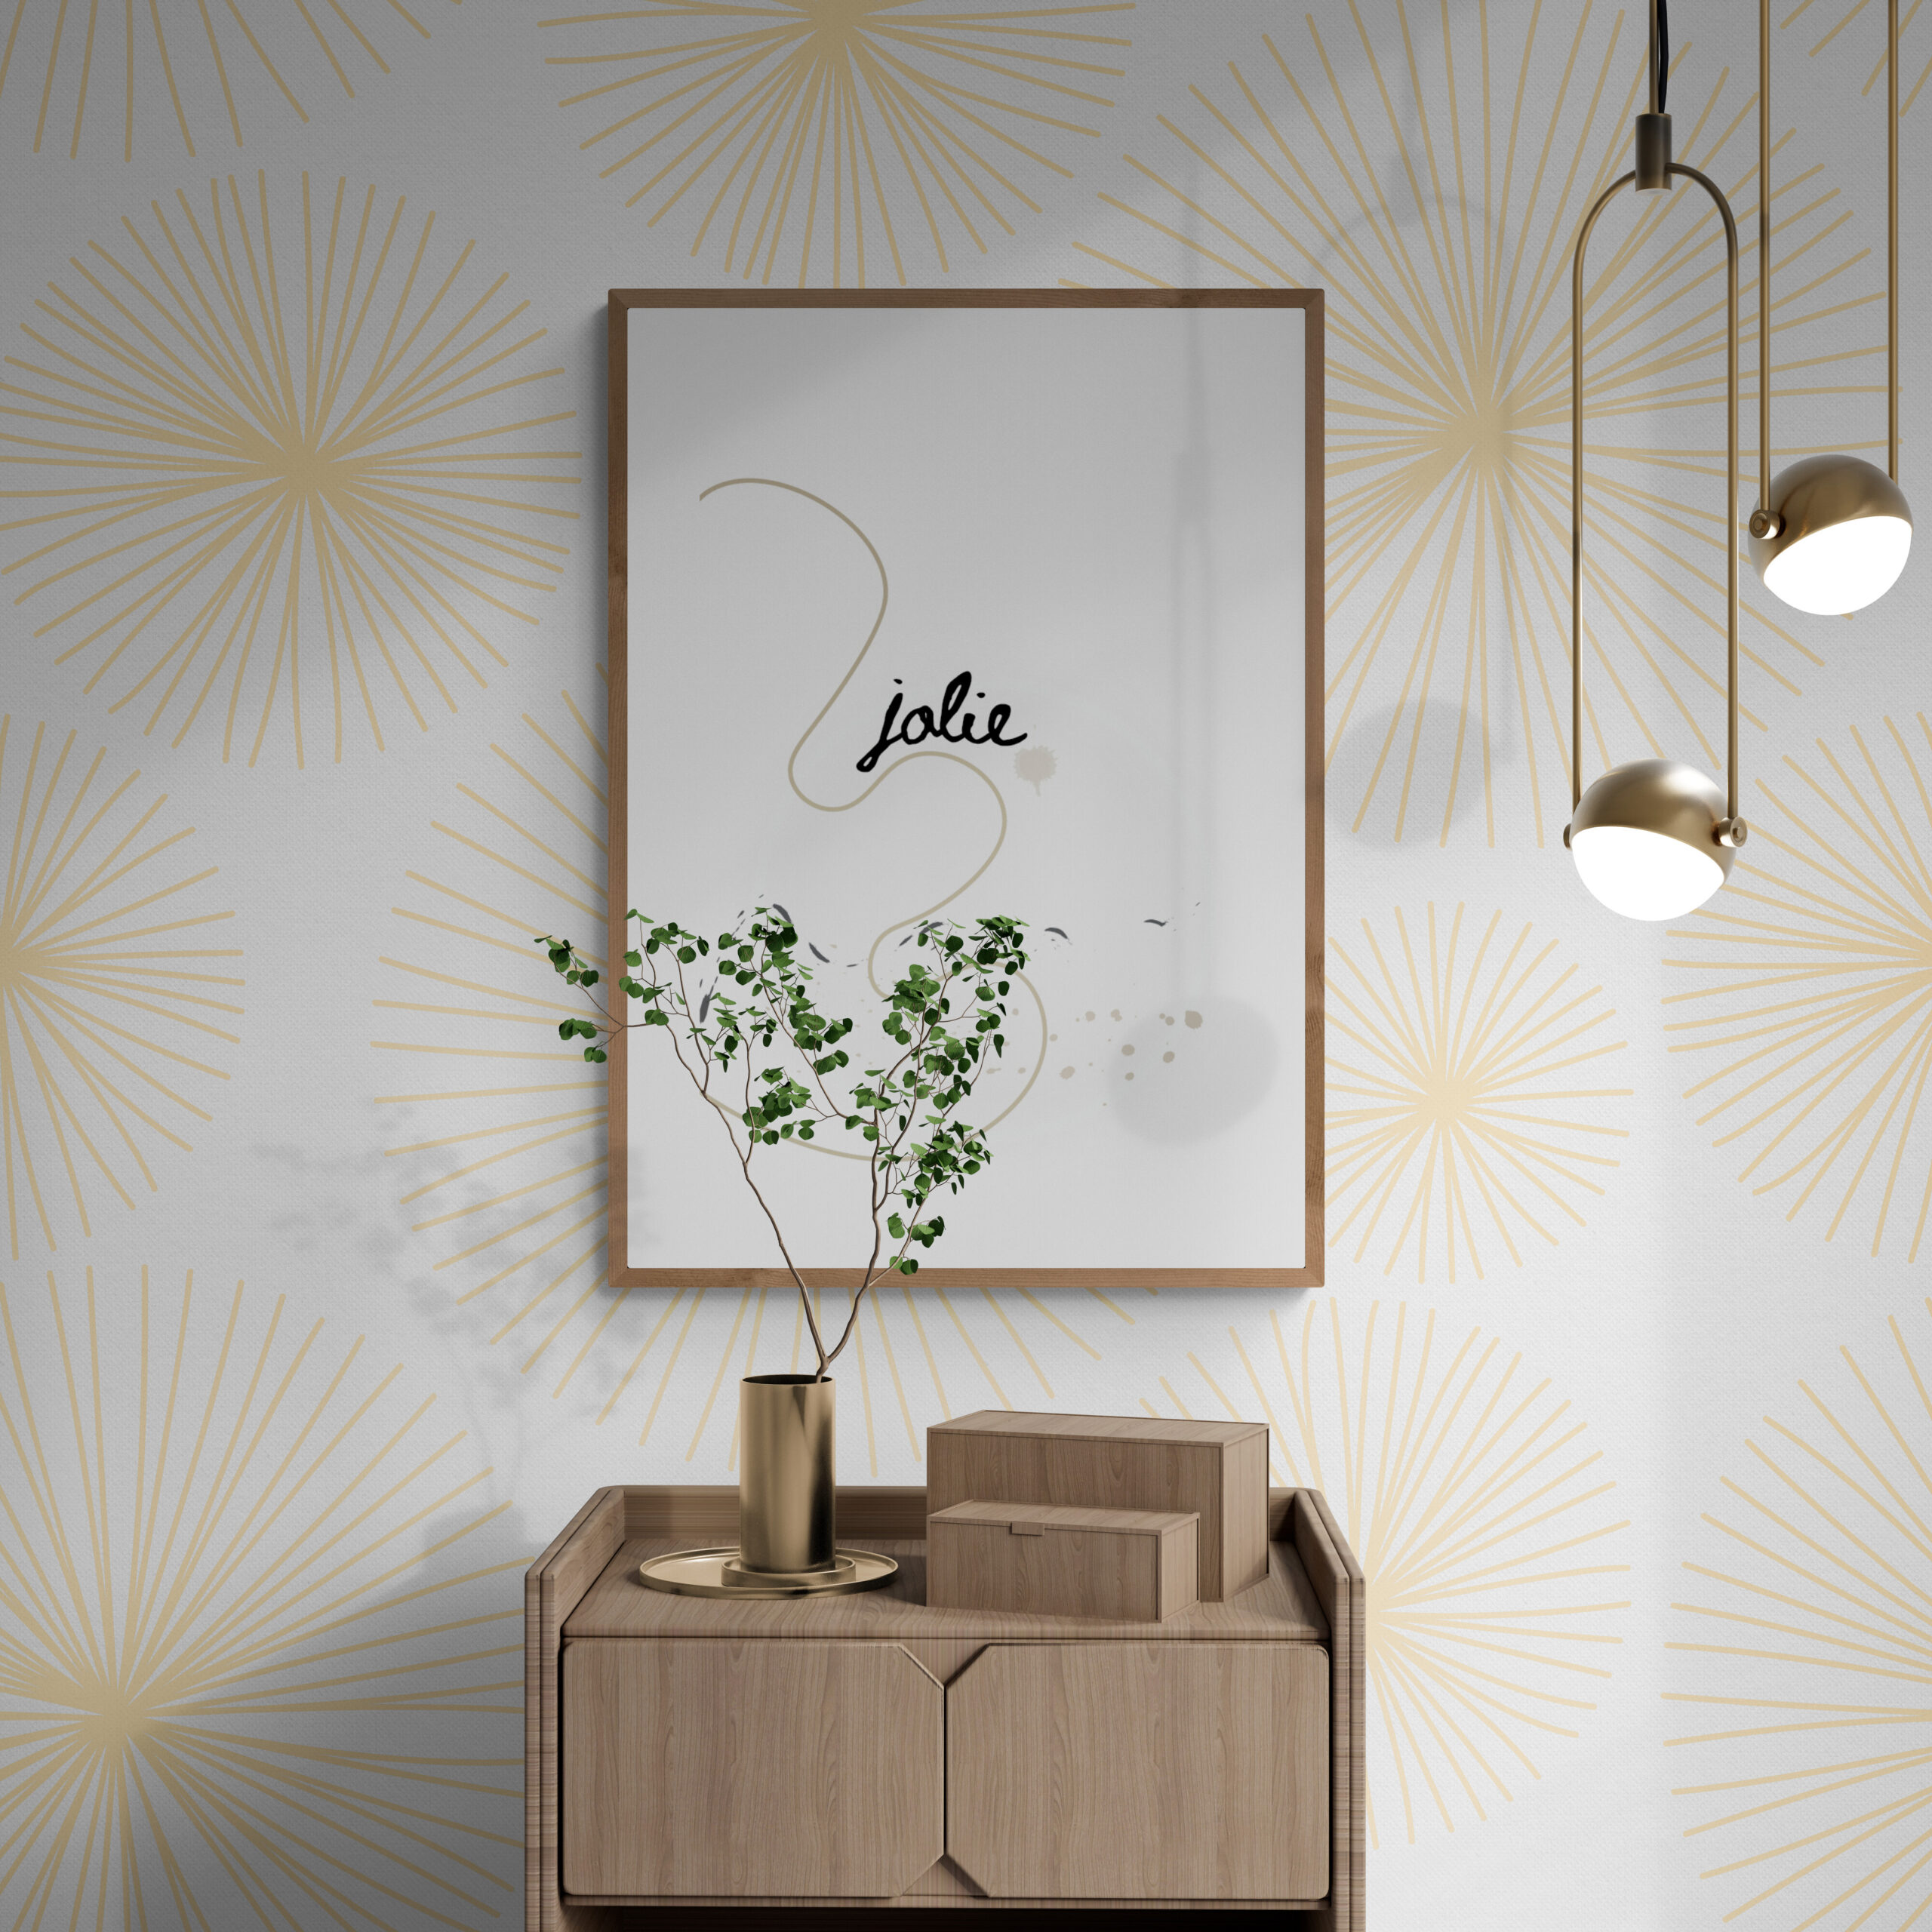 Jolie poster for your home